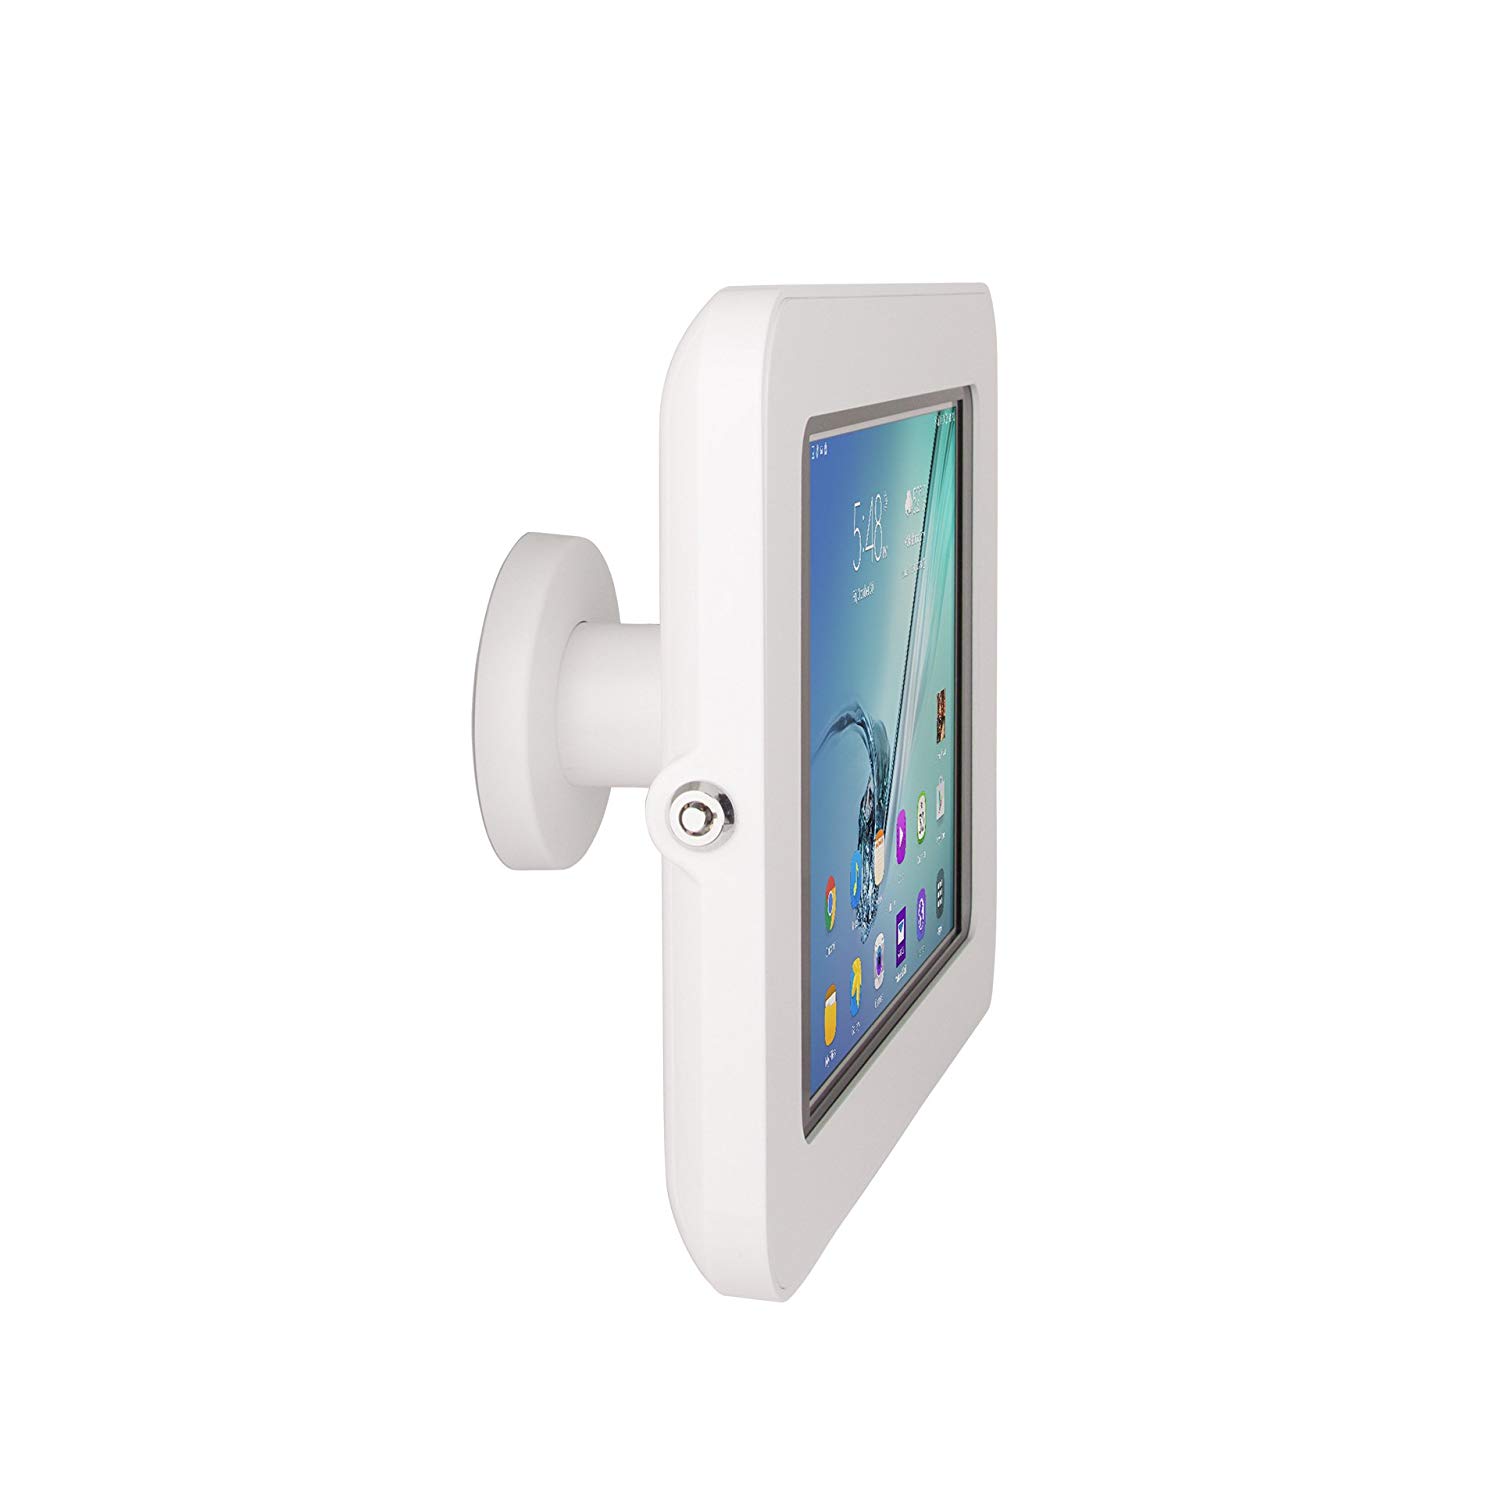 The Joy Factory Elevate II On-Wall Retail Kiosk for Samsung Galaxy Tab S2 and S3 9.7" (KAS204W)